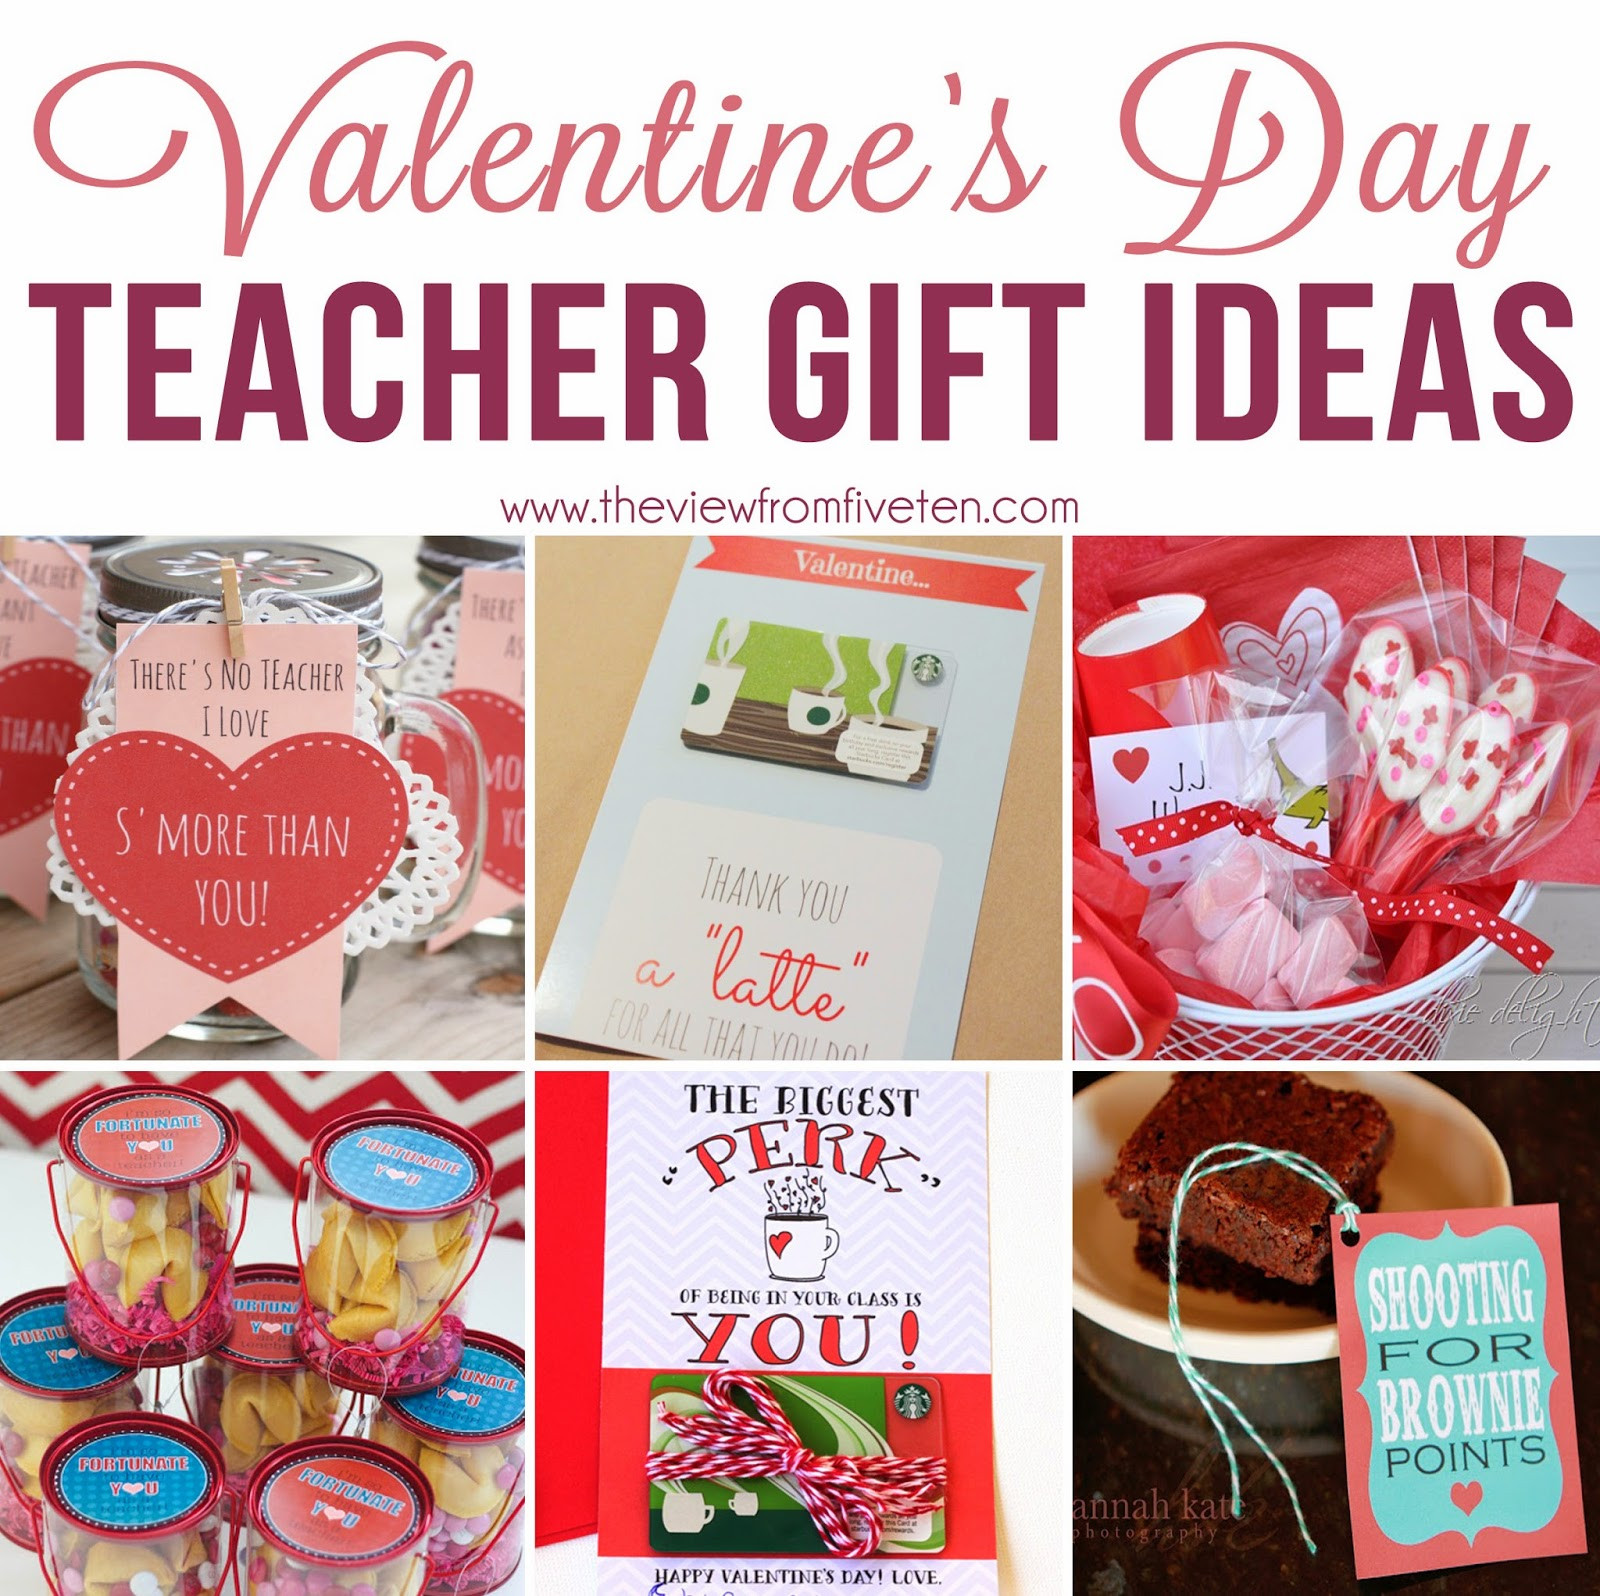 Teacher Valentine Gift Ideas
 The View From 510 Valentine s Day Gift Ideas for Teachers